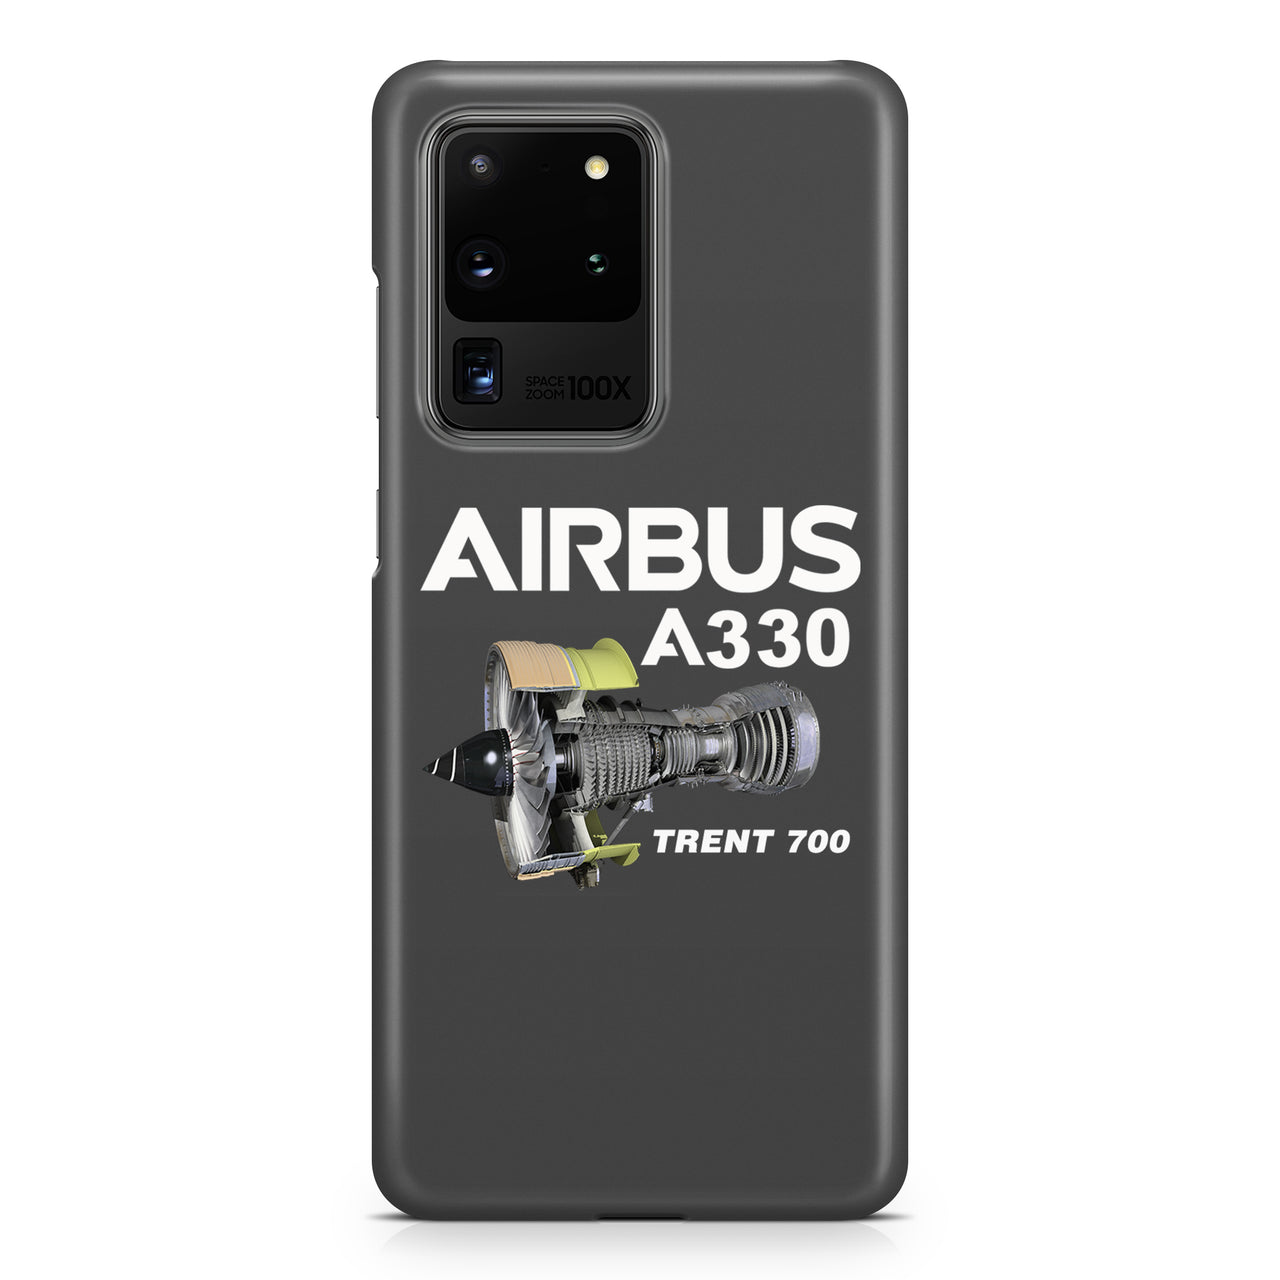 Airbus A330 & Trent 700 Engine Samsung A Cases